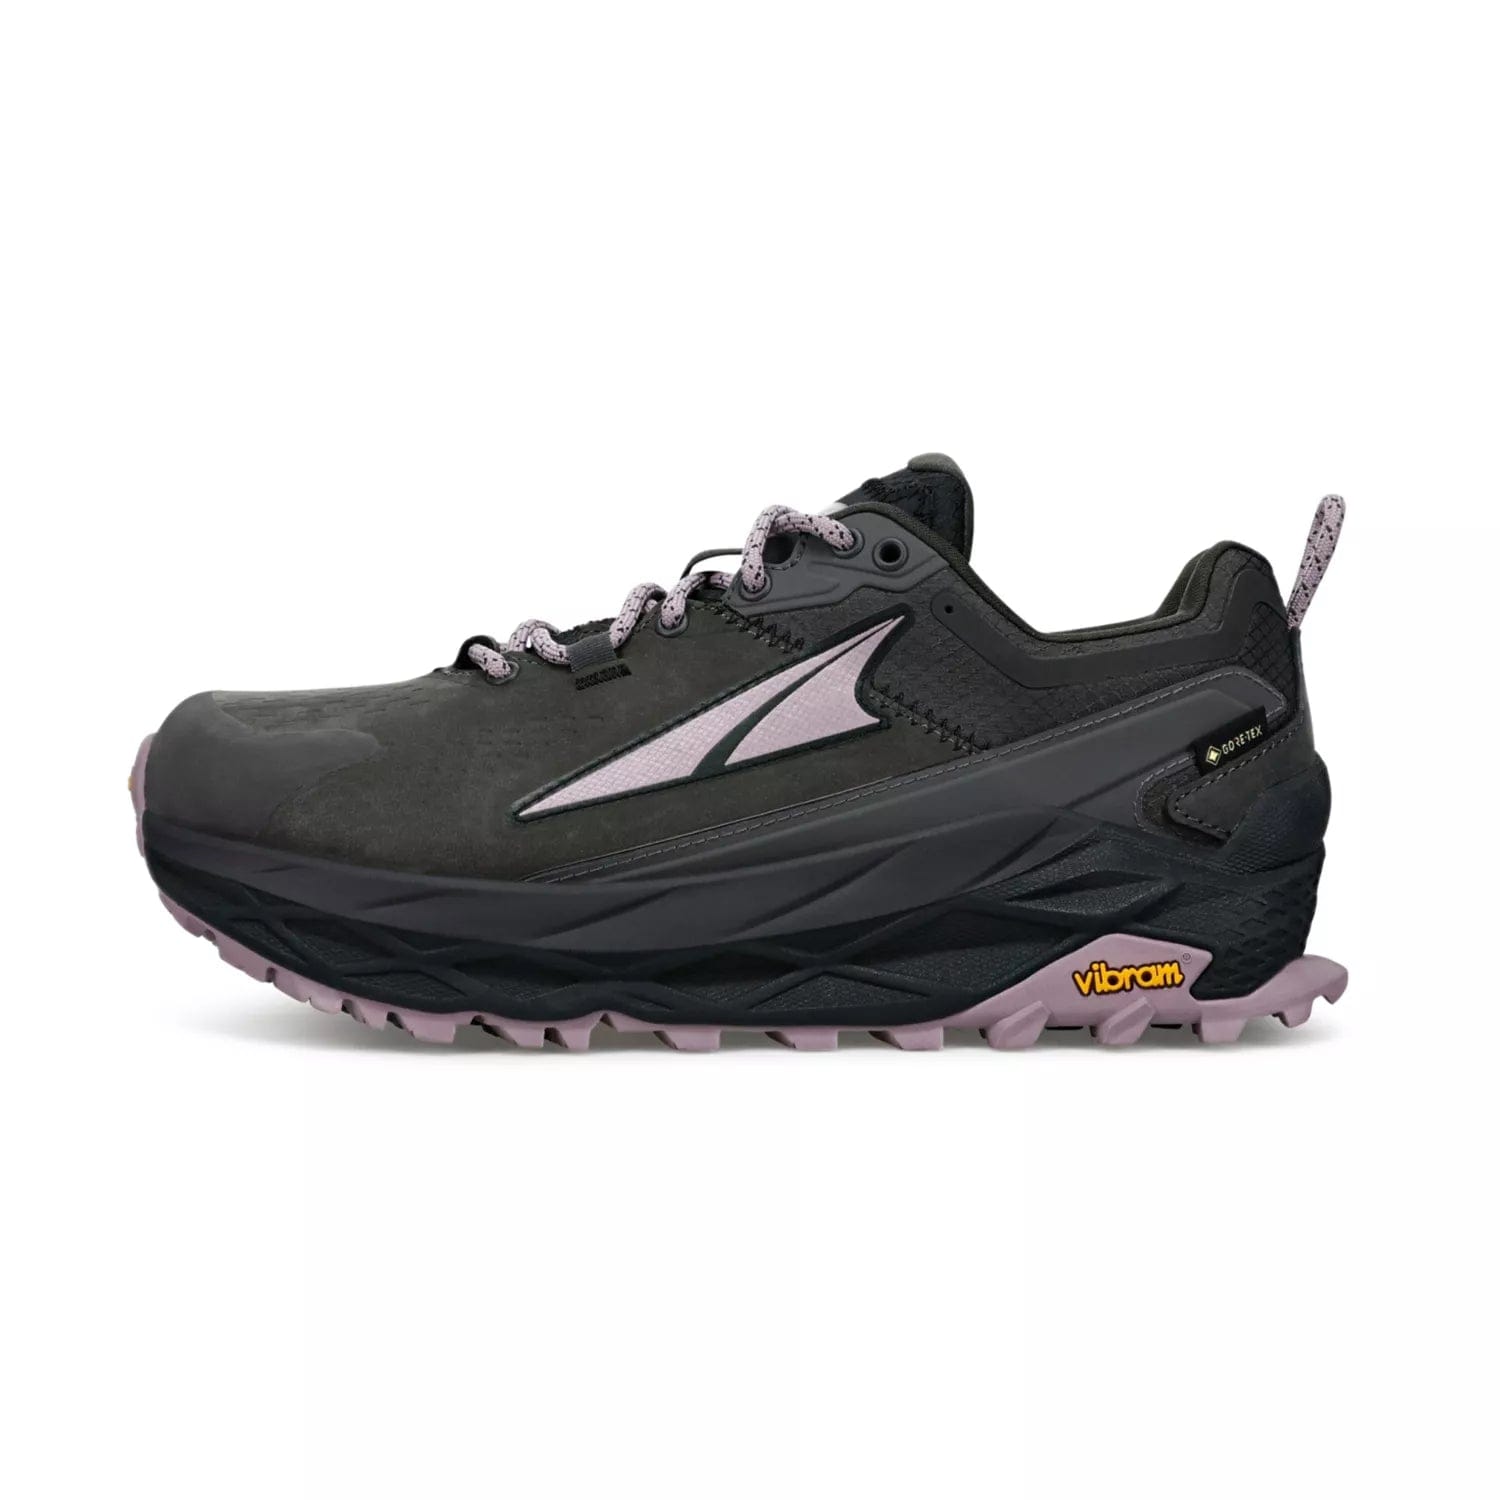 Altra Olympus 5 Hike Low Gtx [Women's] Shoes - Blister Prevention